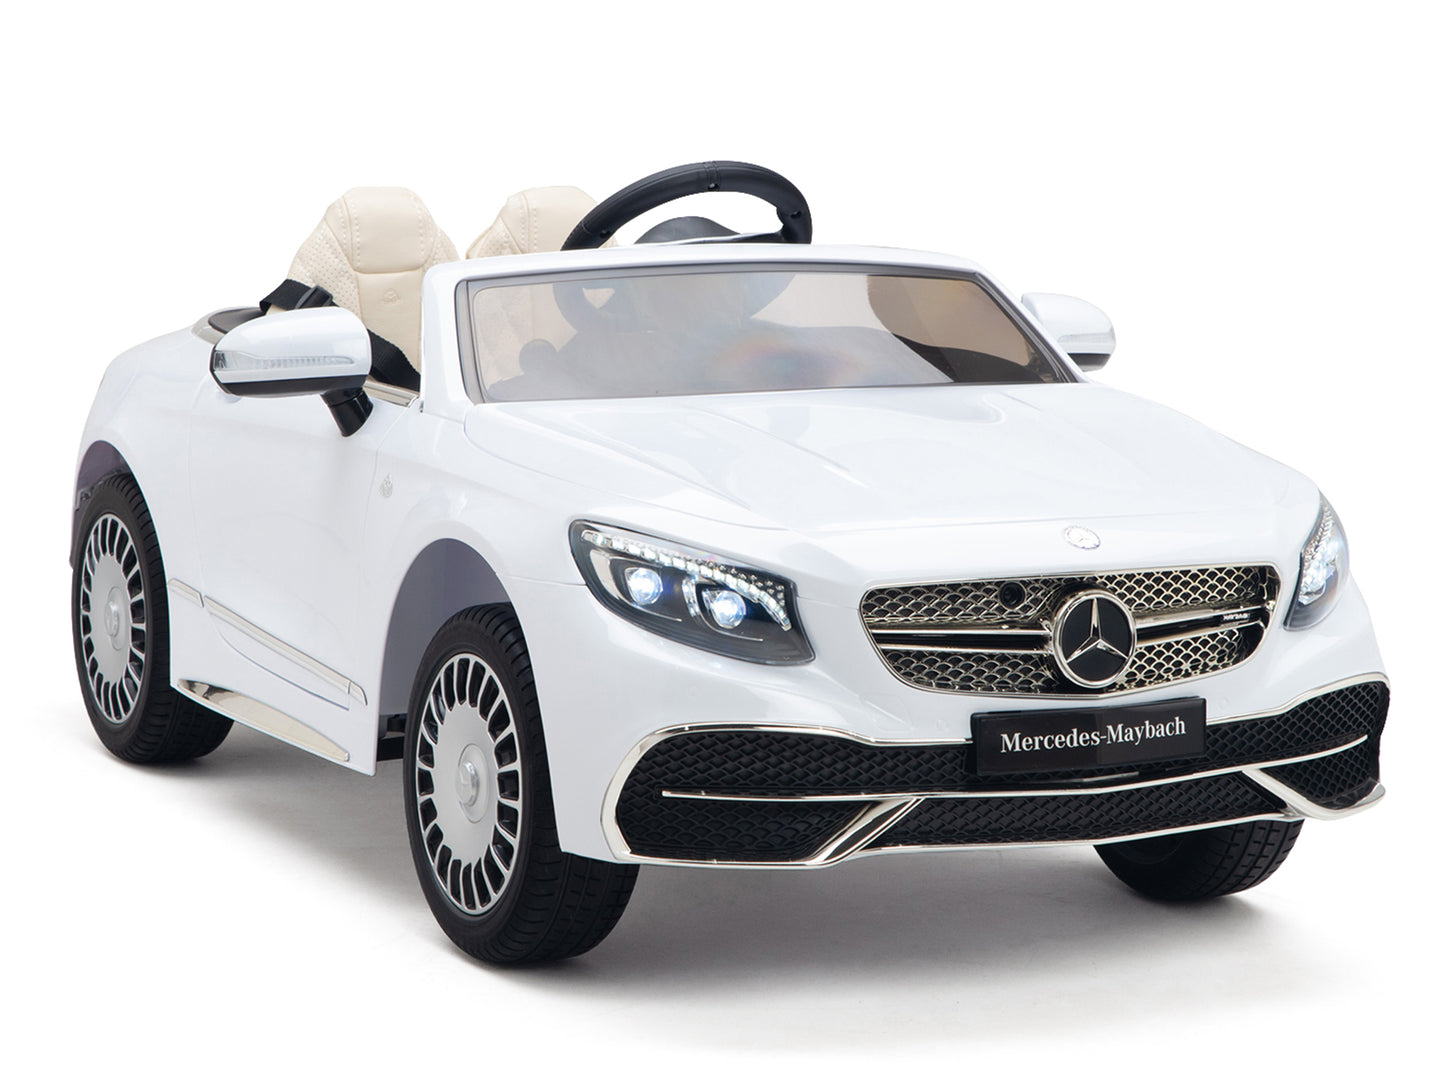 12V Mercedes-Benz Maybach Kids Electric Powered Ride on Car With Remote Control, Radio & MP3 - White